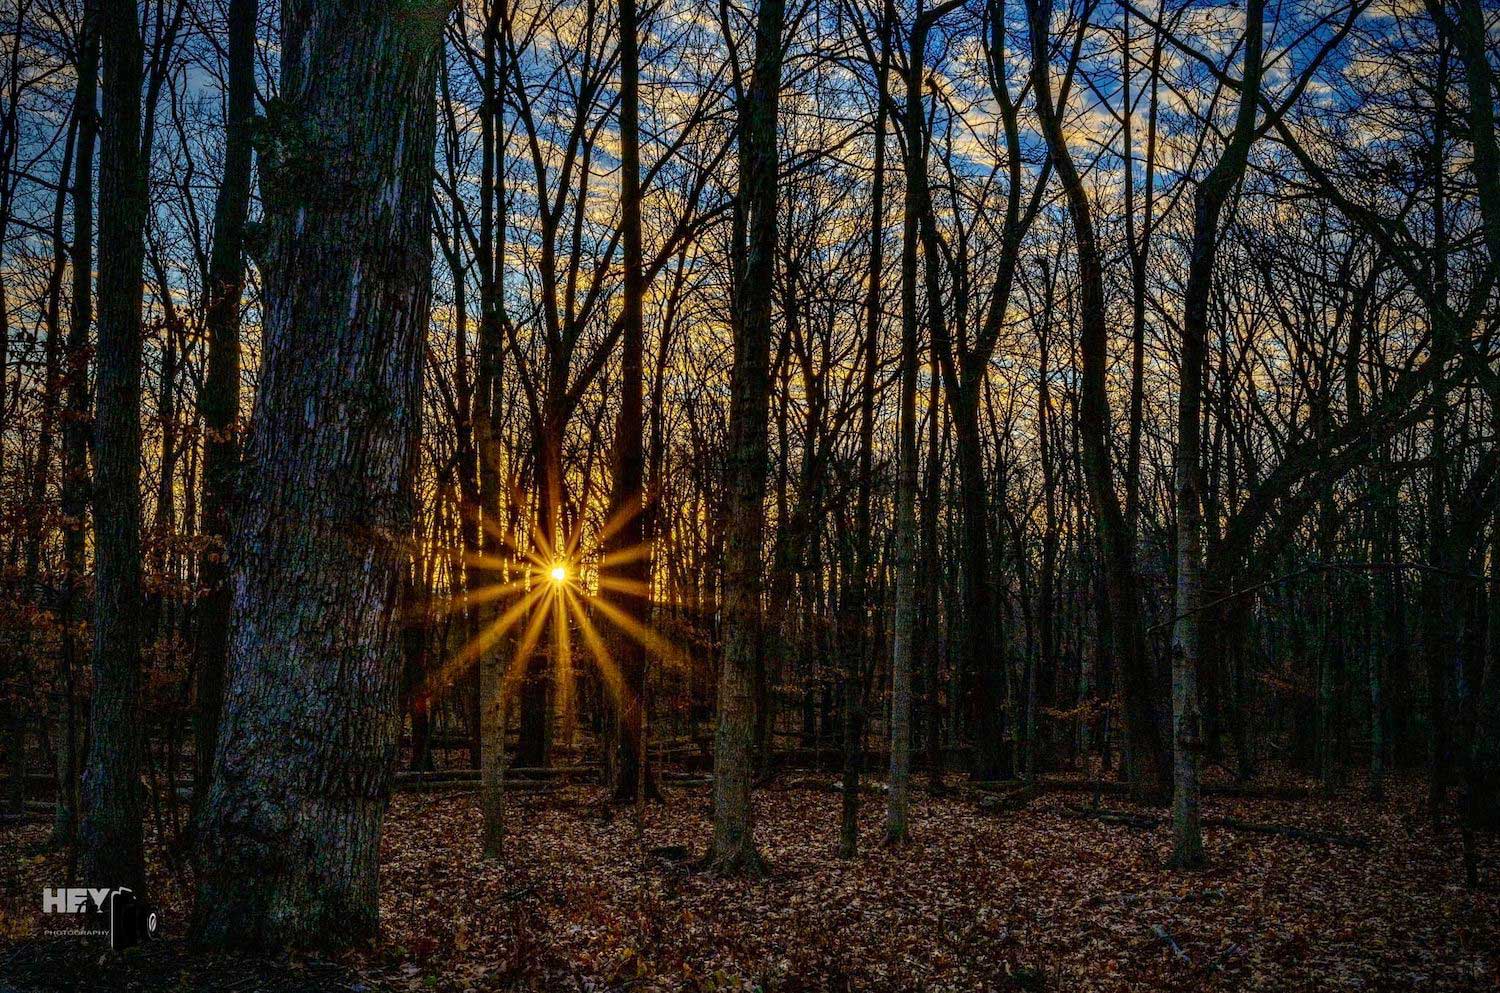 The sun setting behind a stand of trees.